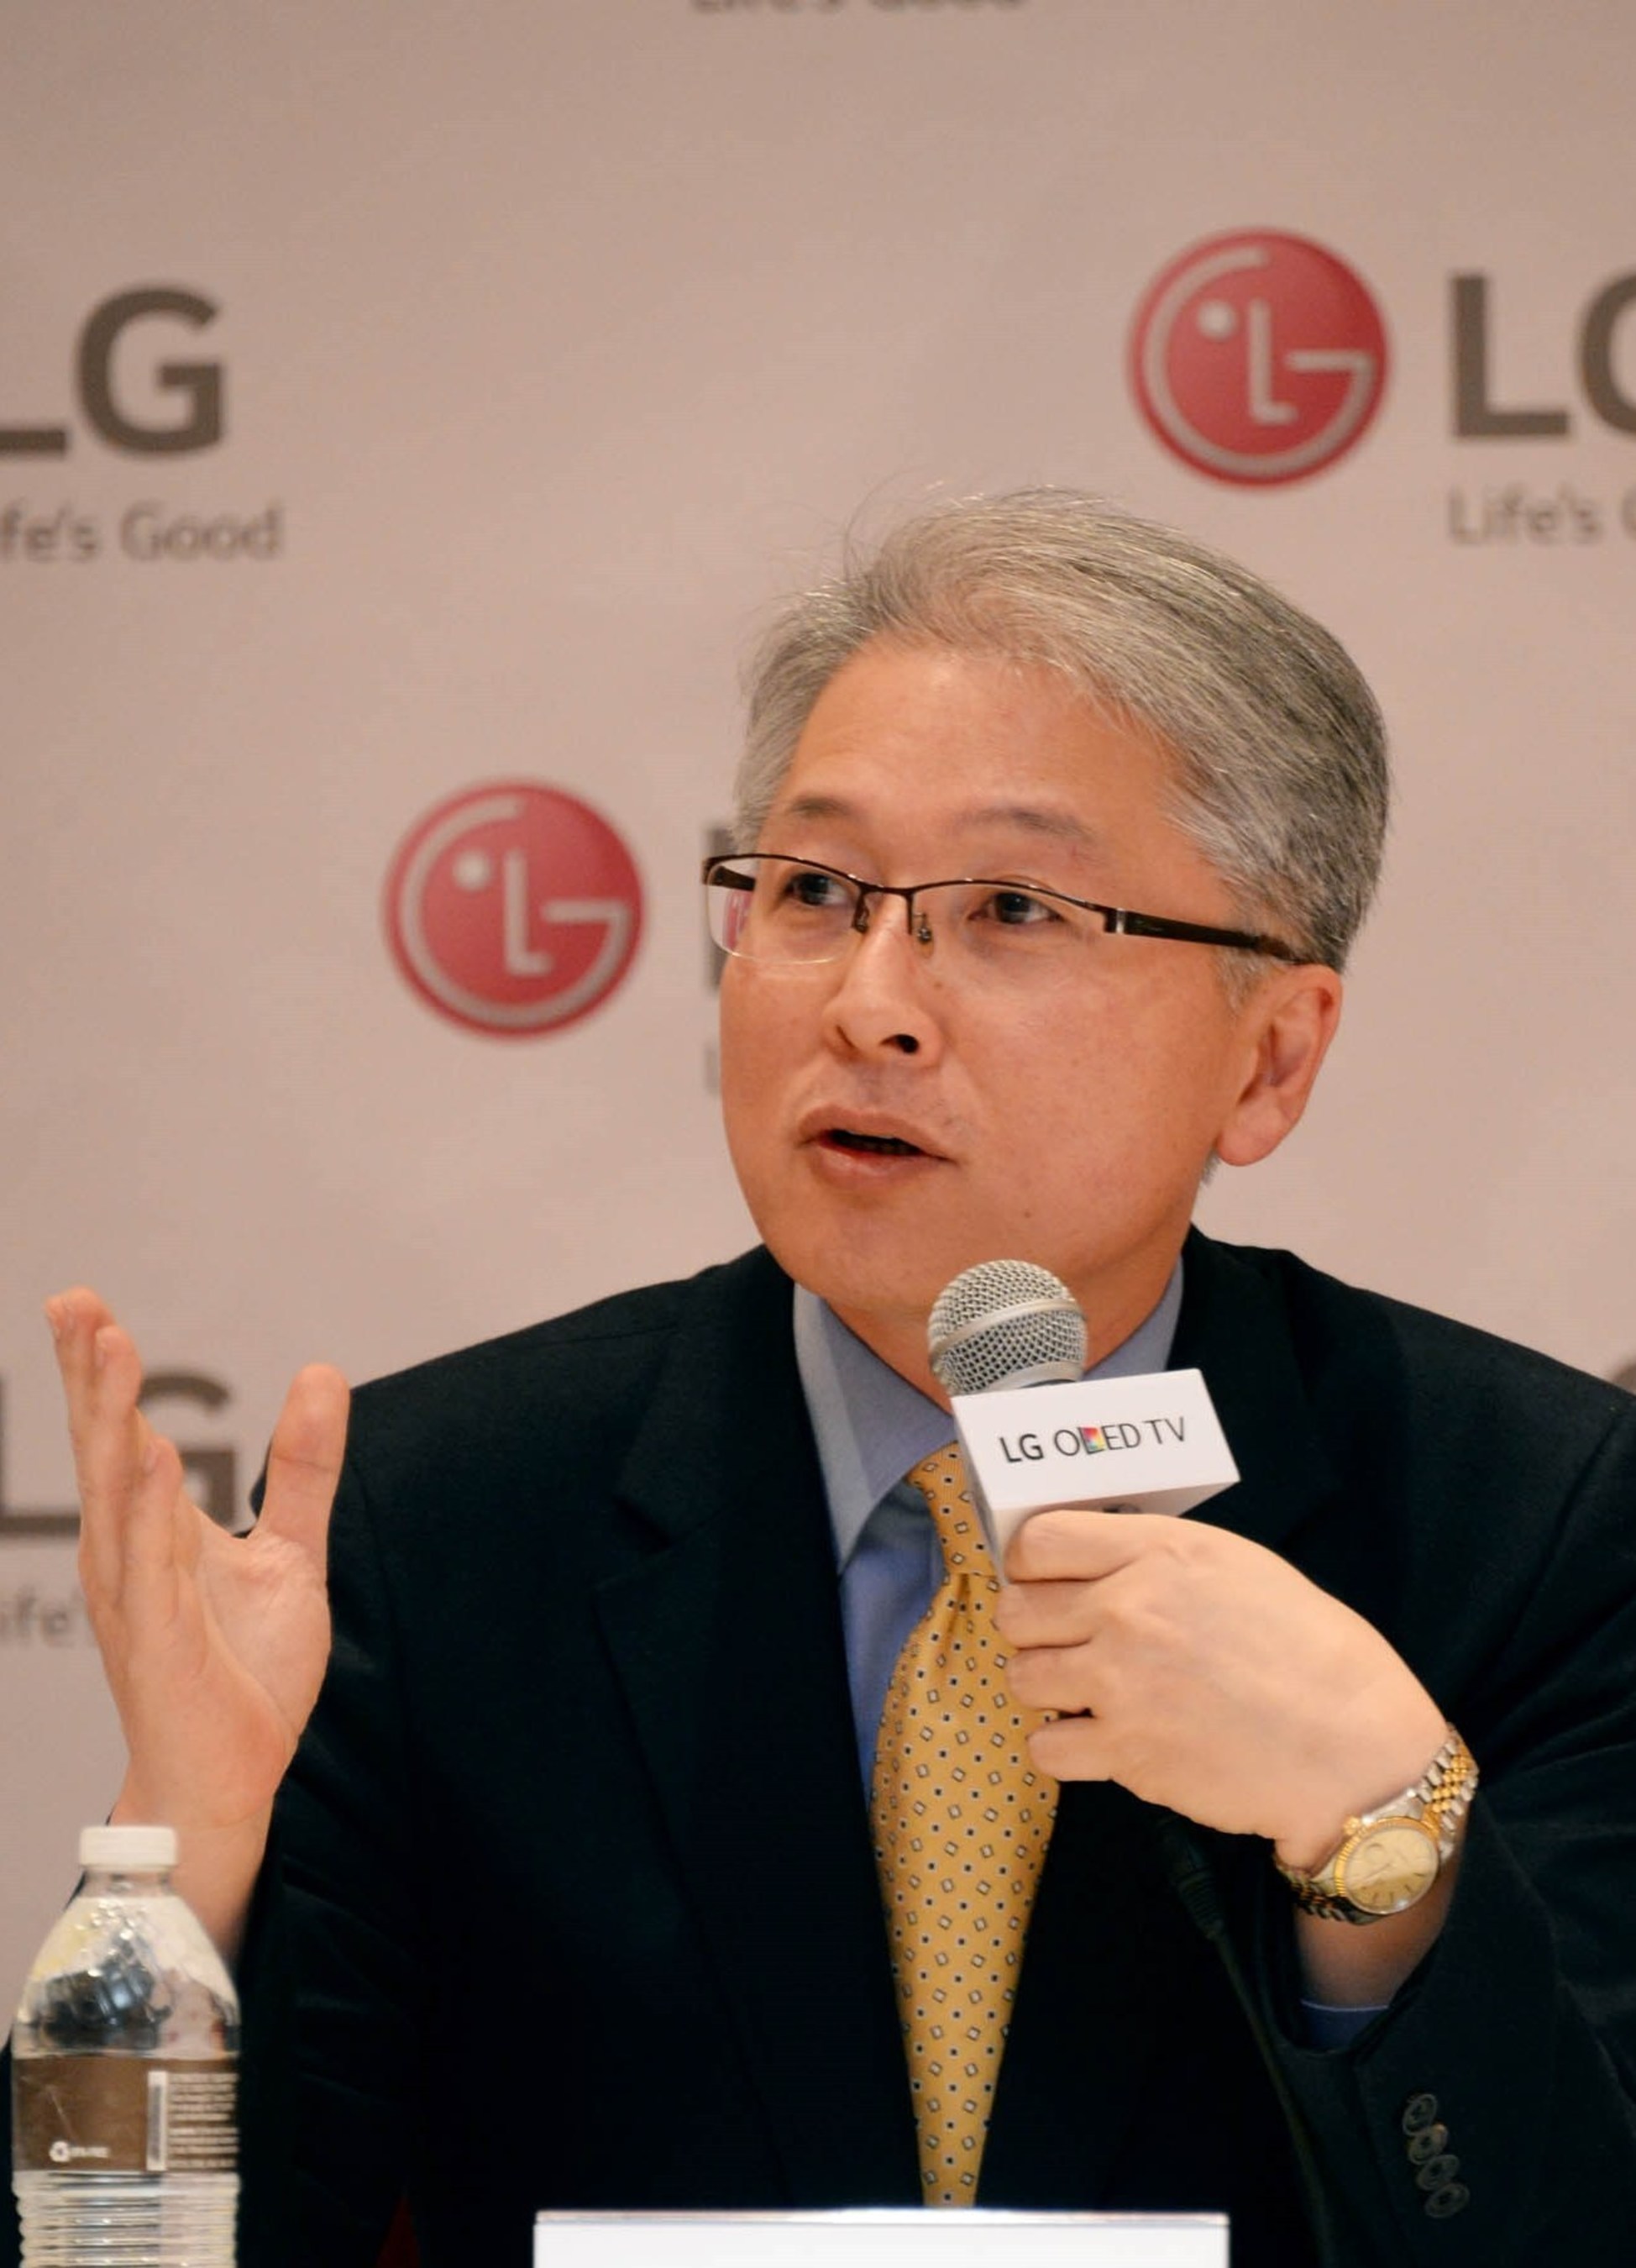 New LG Home Entertainment Company CEO, Brian Kwon, Reveals Business Strategies For 2015